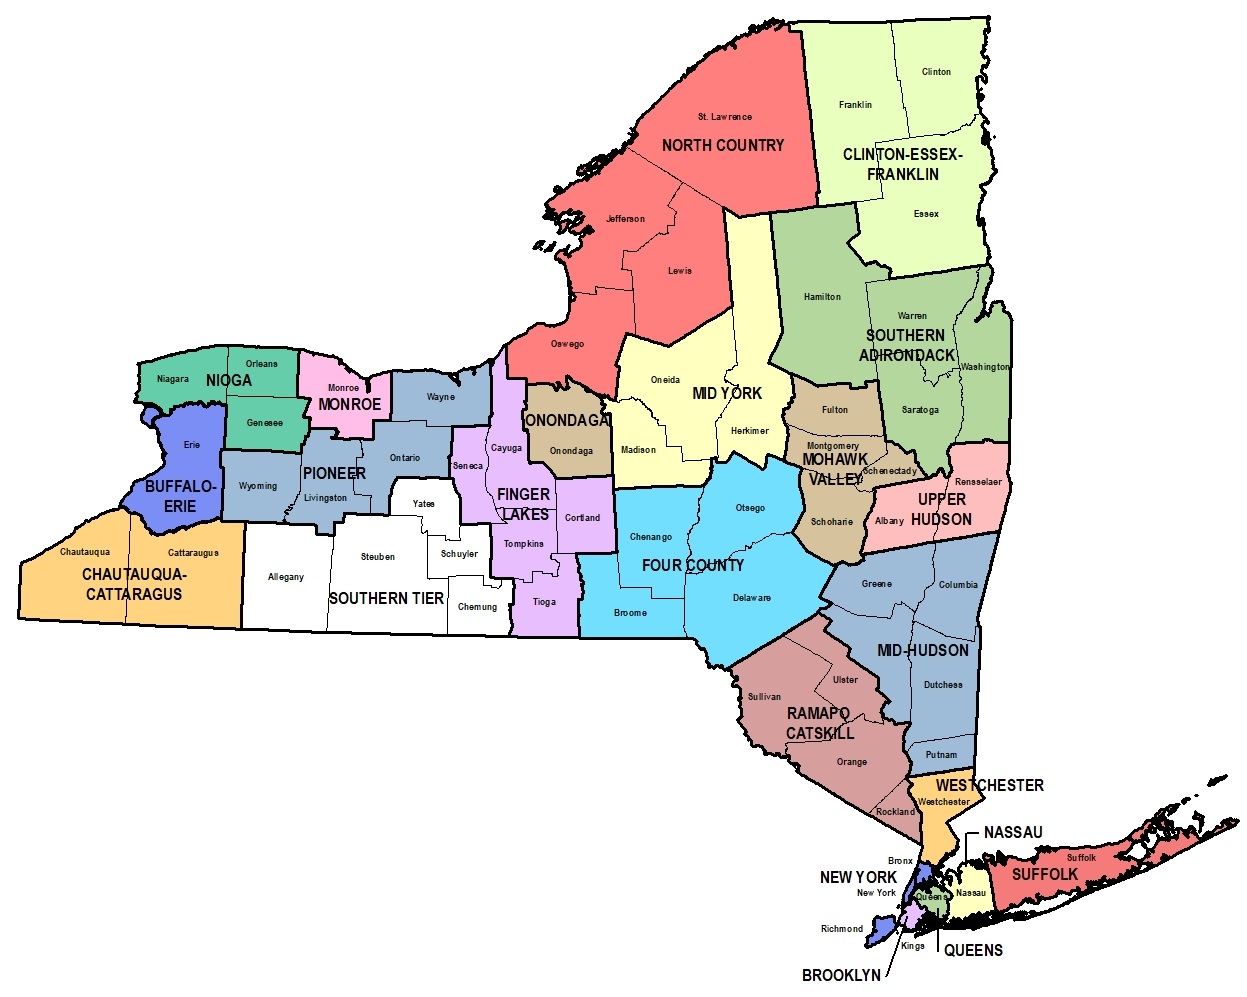 [Image of the public library systems of New York State; click here for a larger clickable version.]